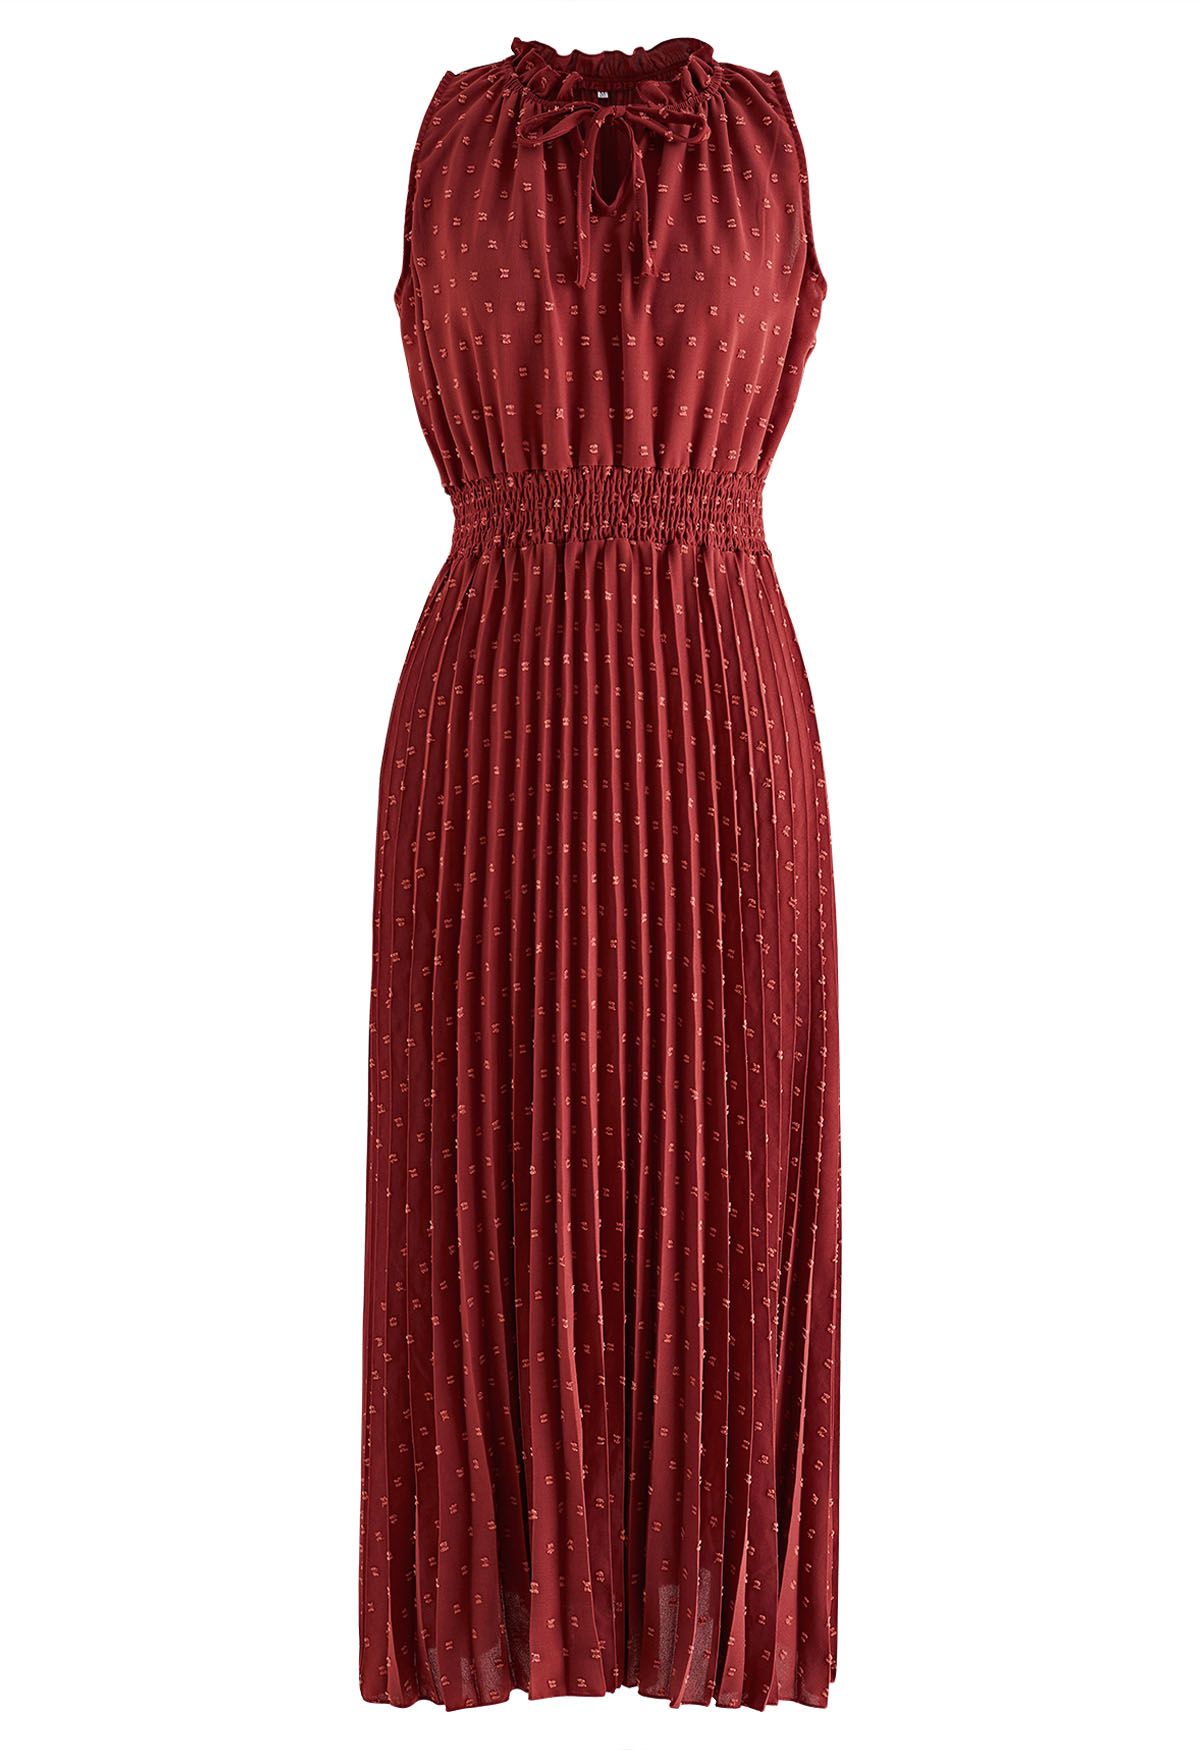 Tie-Neck Flock Dot Pleated Dress in Rust Red